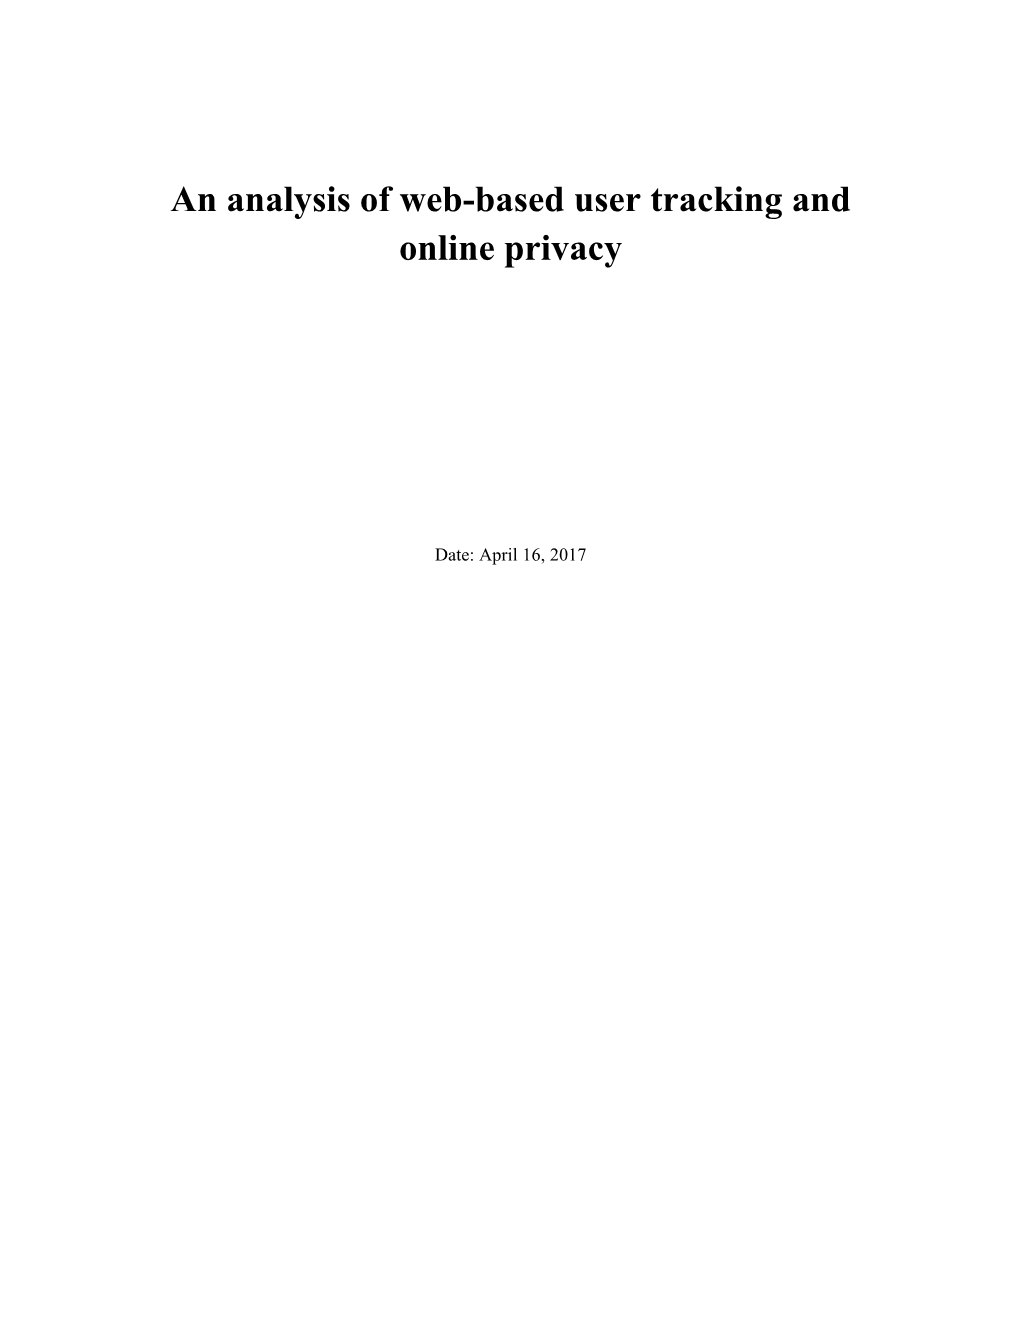 An Analysis of Web-Based User Tracking and Online Privacy